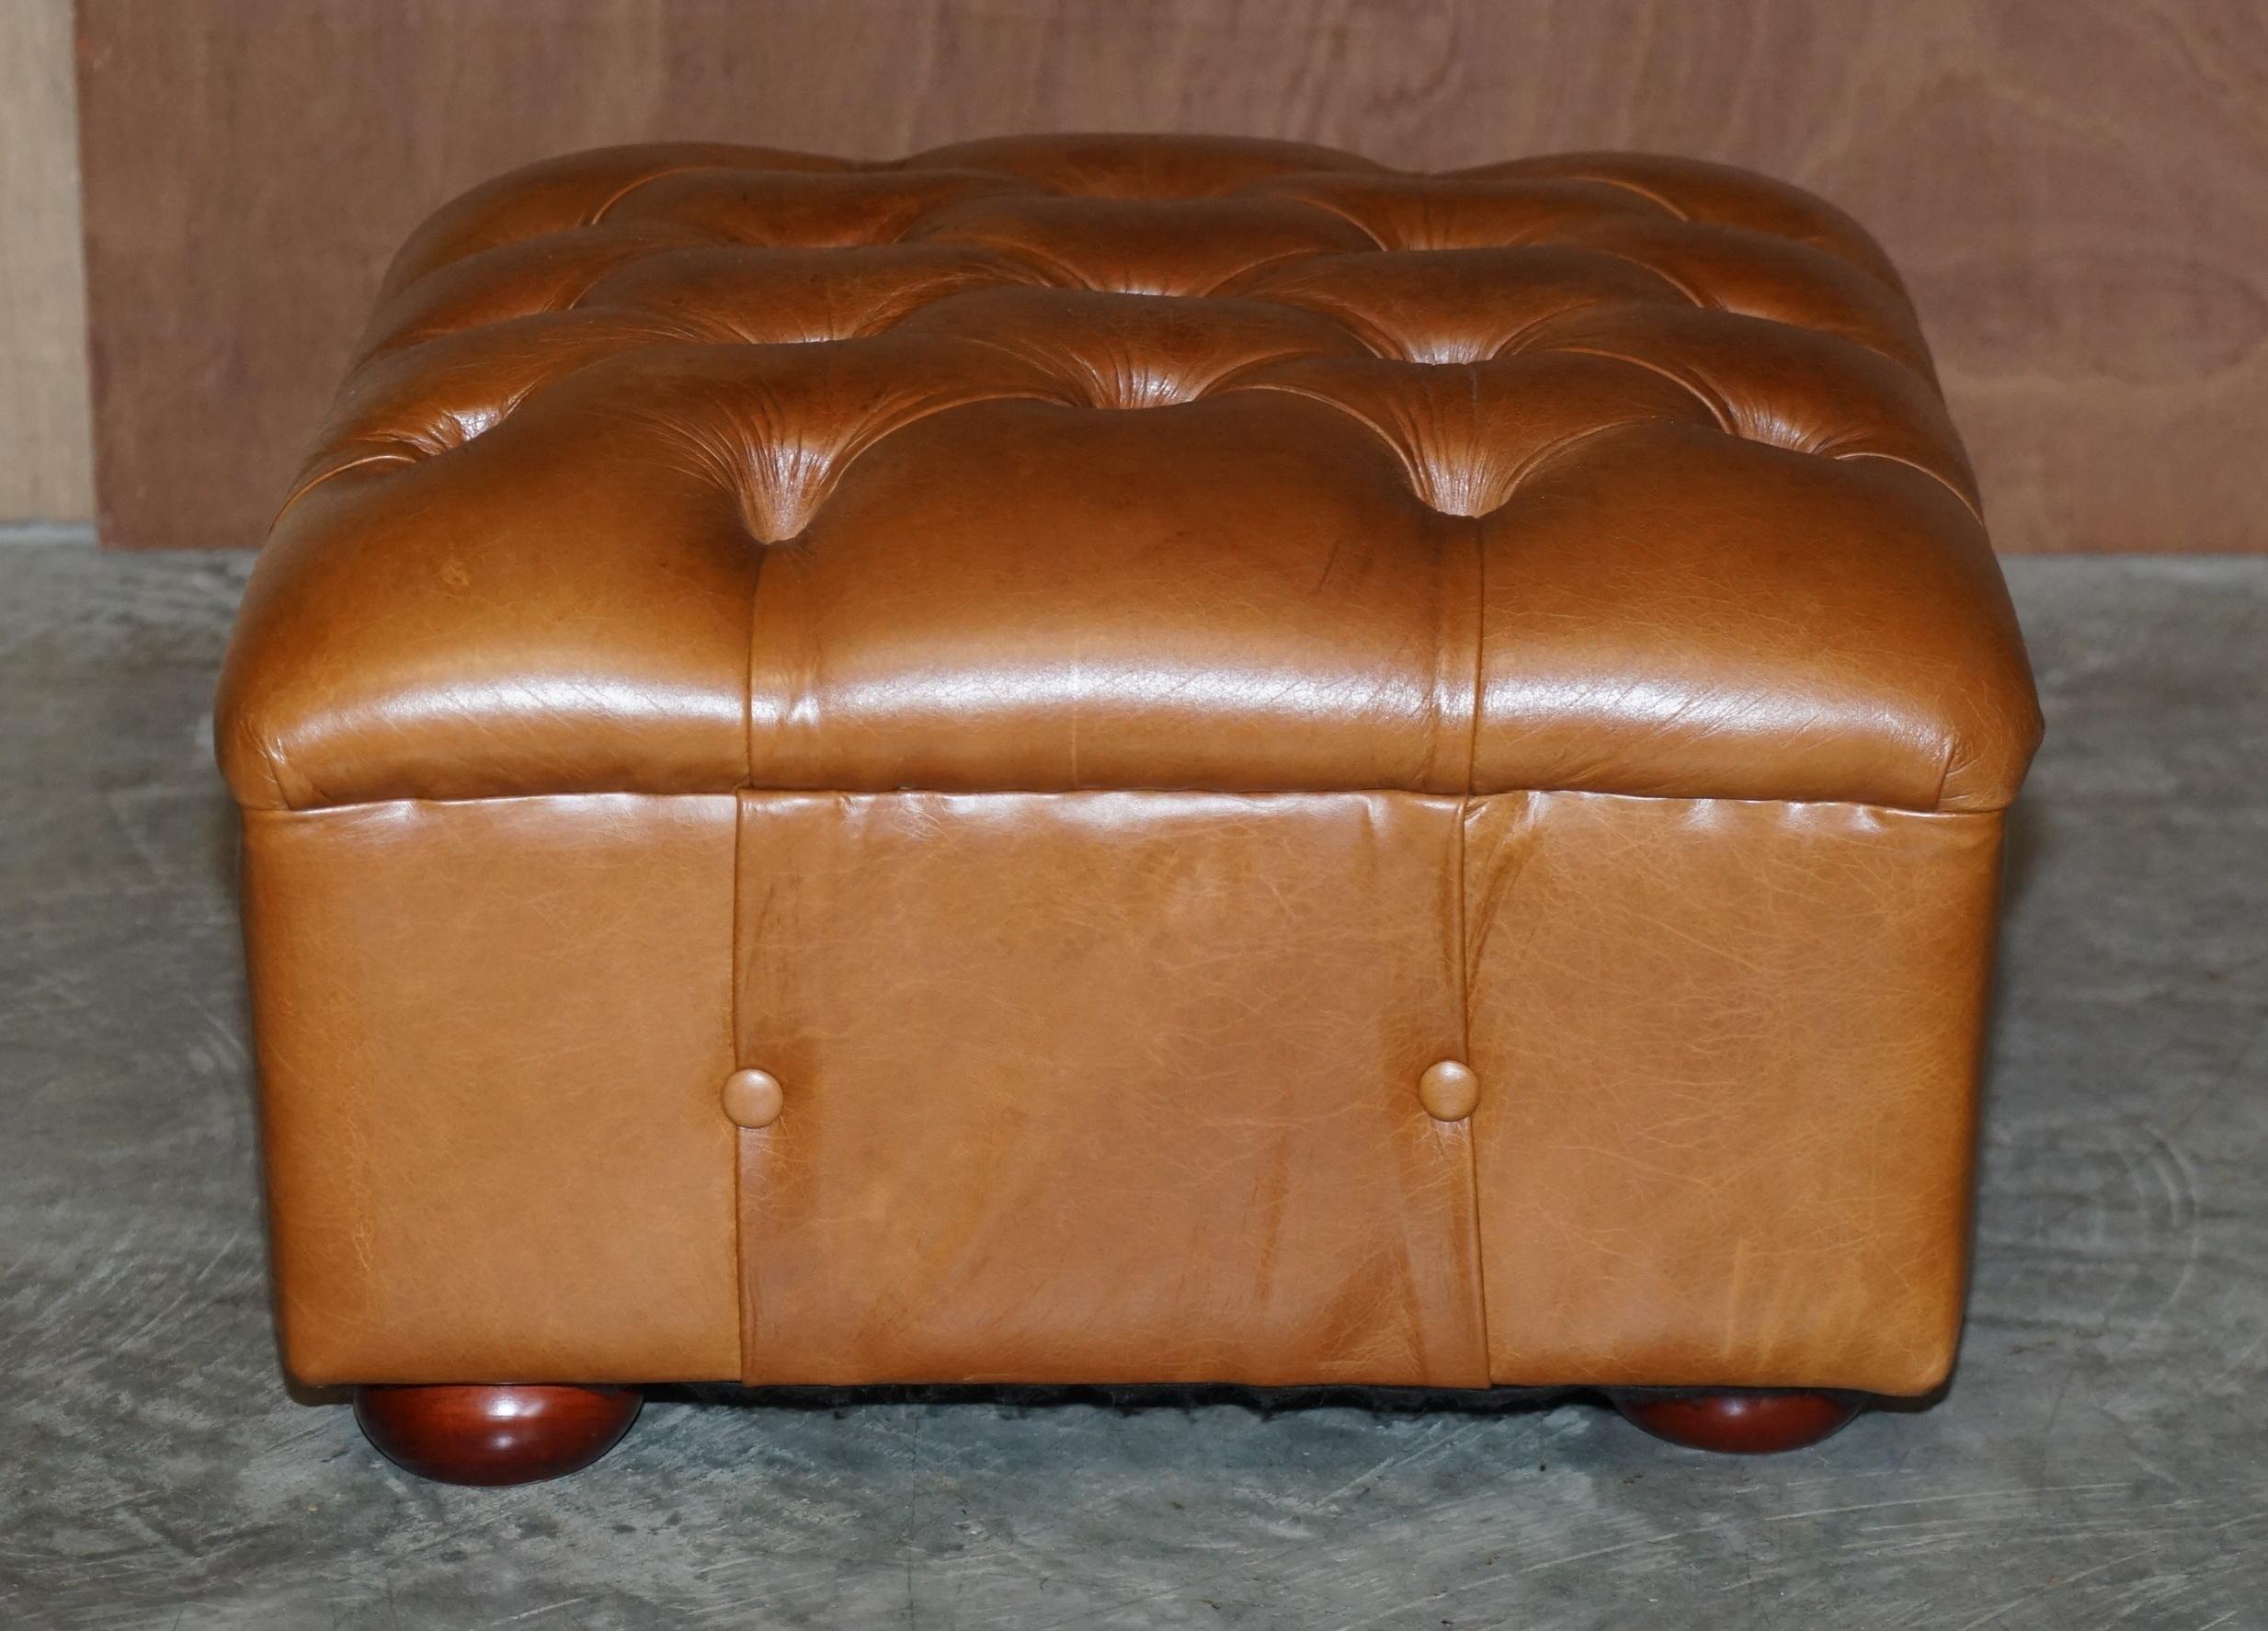 Chesterfield Brown Leather Tufted Square Footstool Vintage Biker Tan Leather For Sale 1